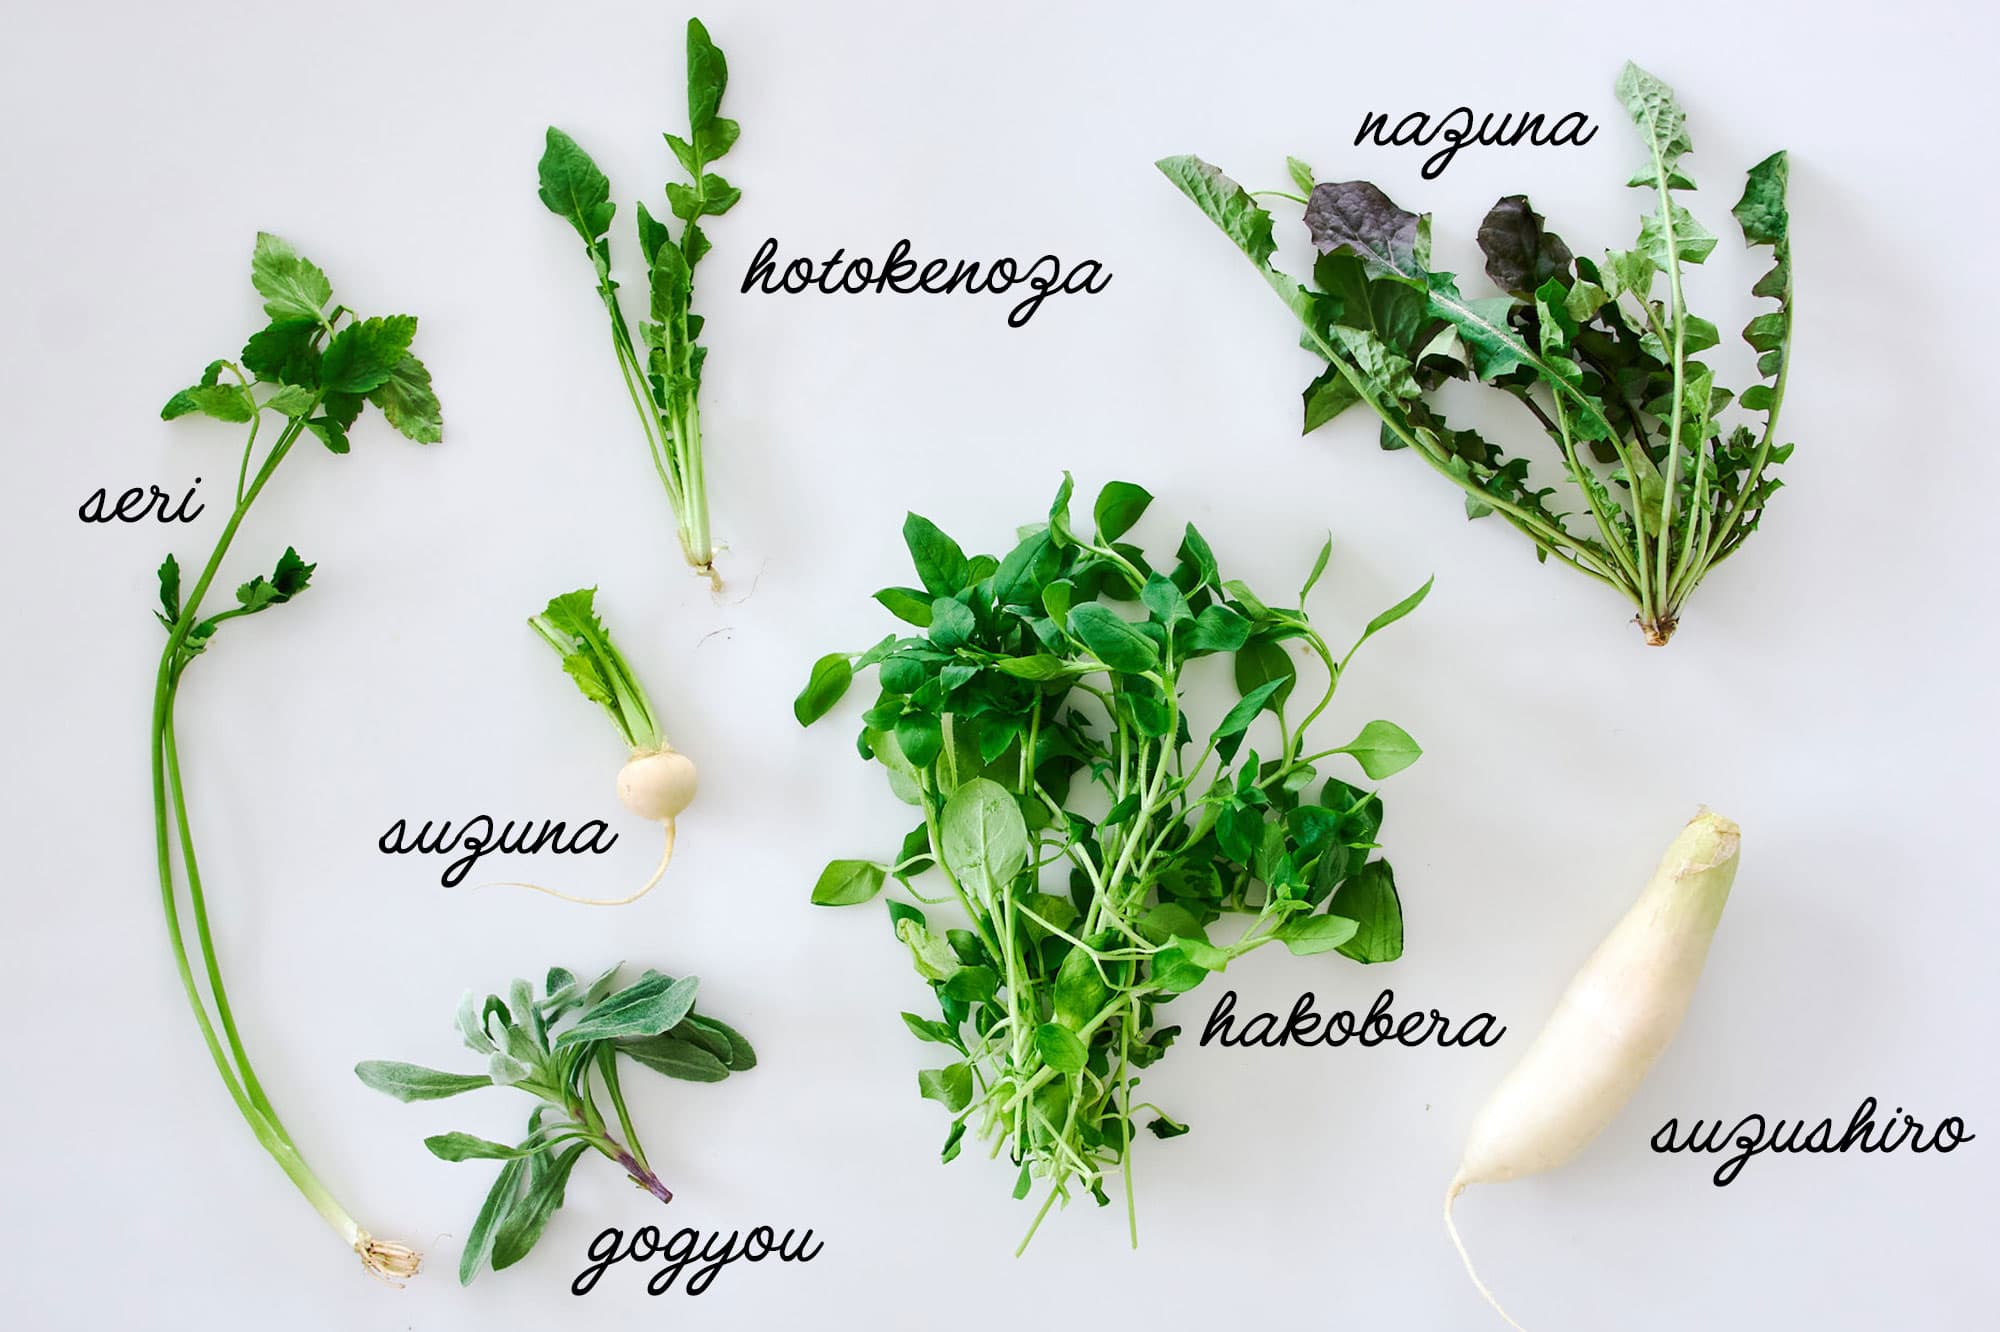 Traditional Japanese herbs with labels.